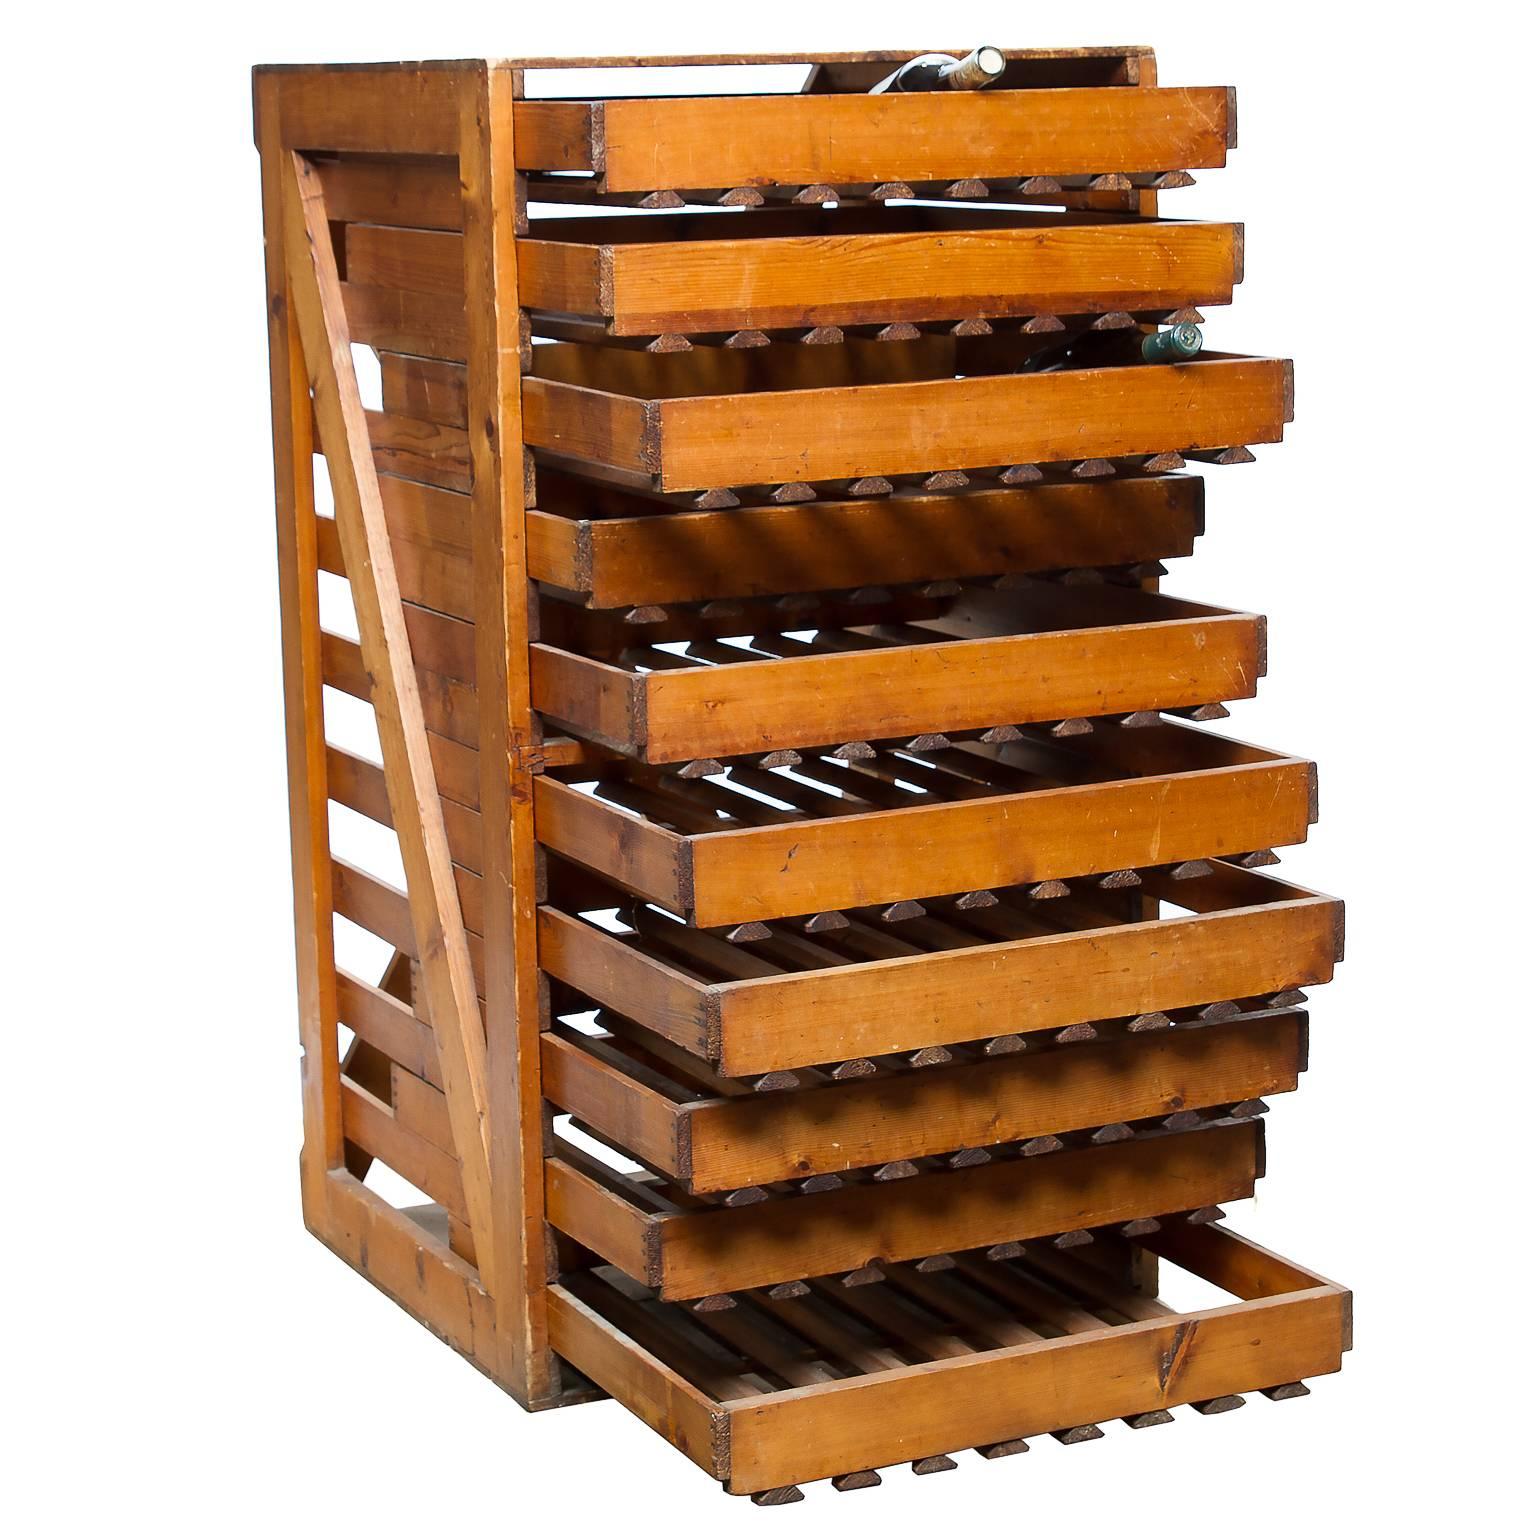 Vintage English apple and pear shop storage piece. Ten pullout shelves each functional very well. Made from pine which has aged well wonderful coloring. Great storage for wine and a great look.